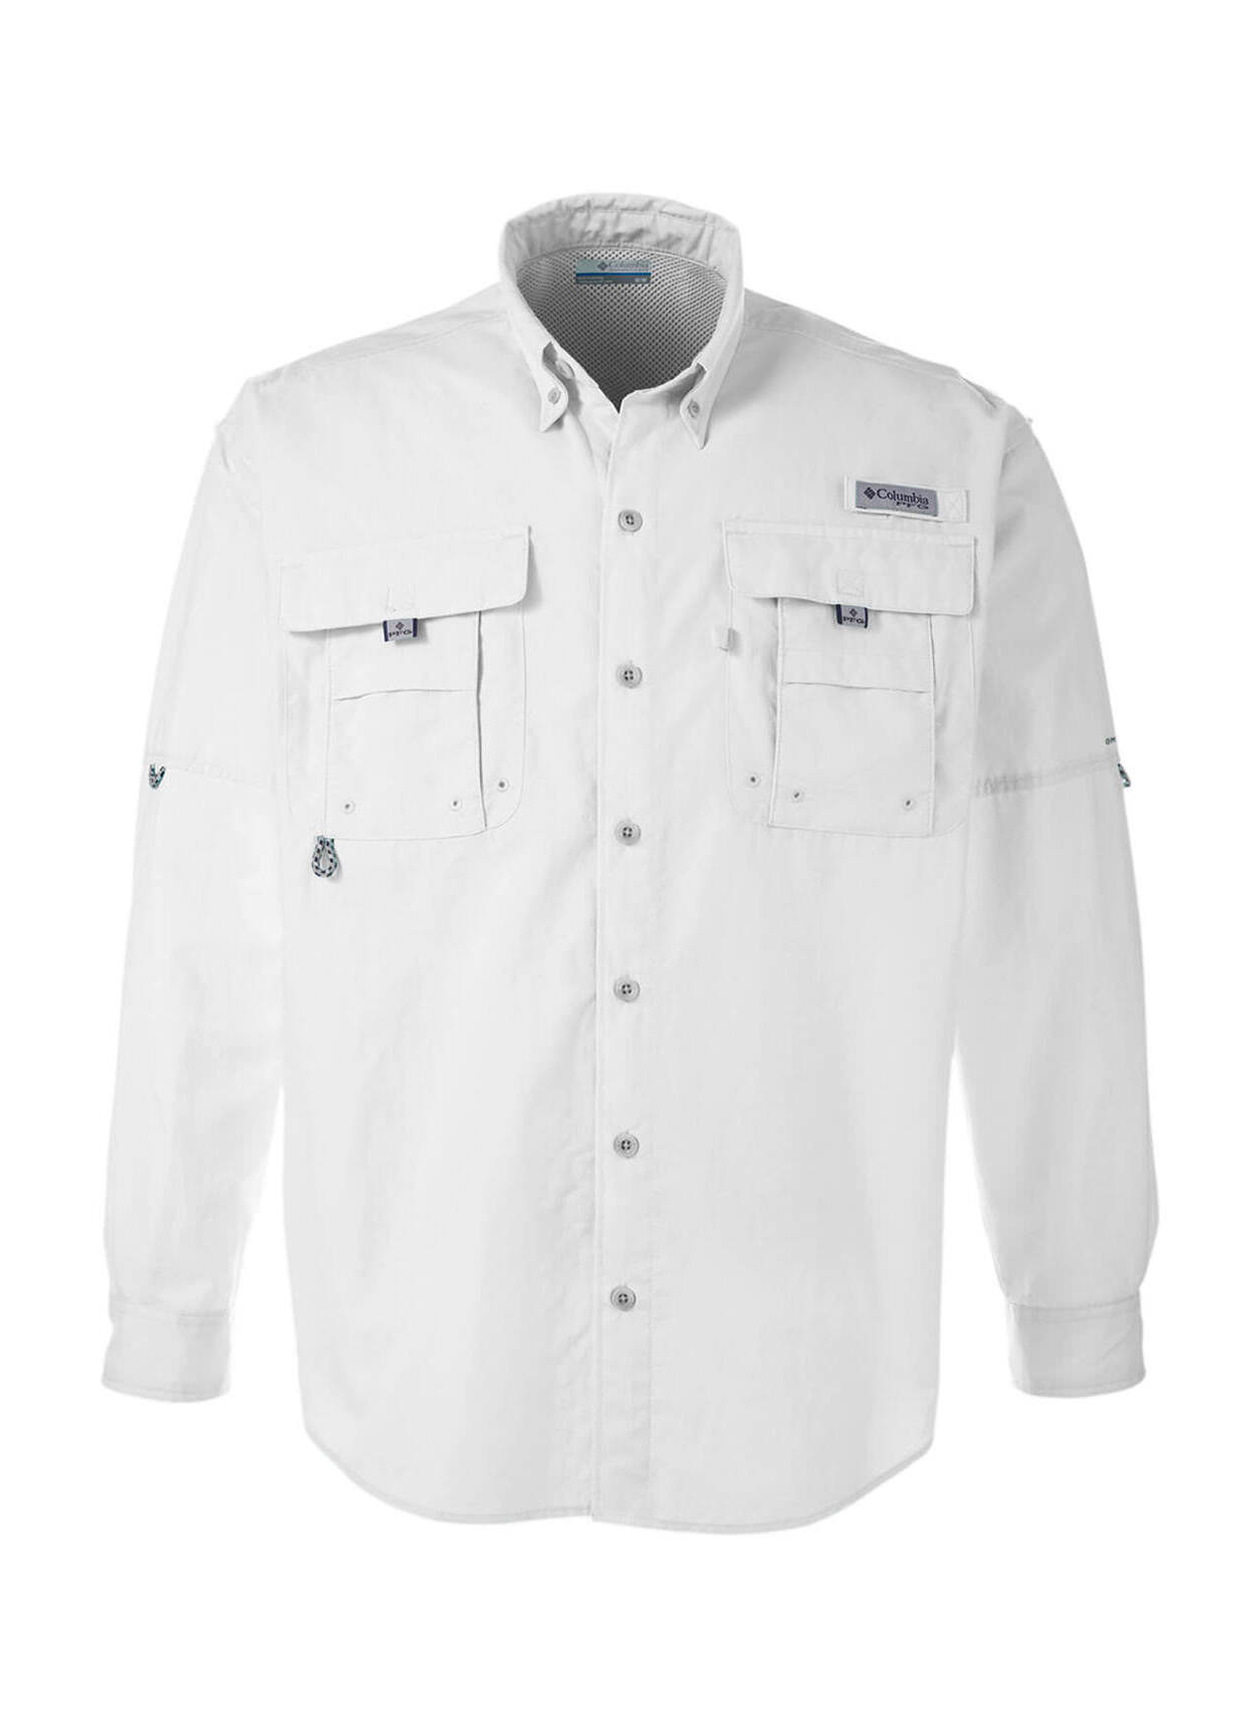 Men's large All-American Fisherman white long sleeve roll tab button-up  shirt